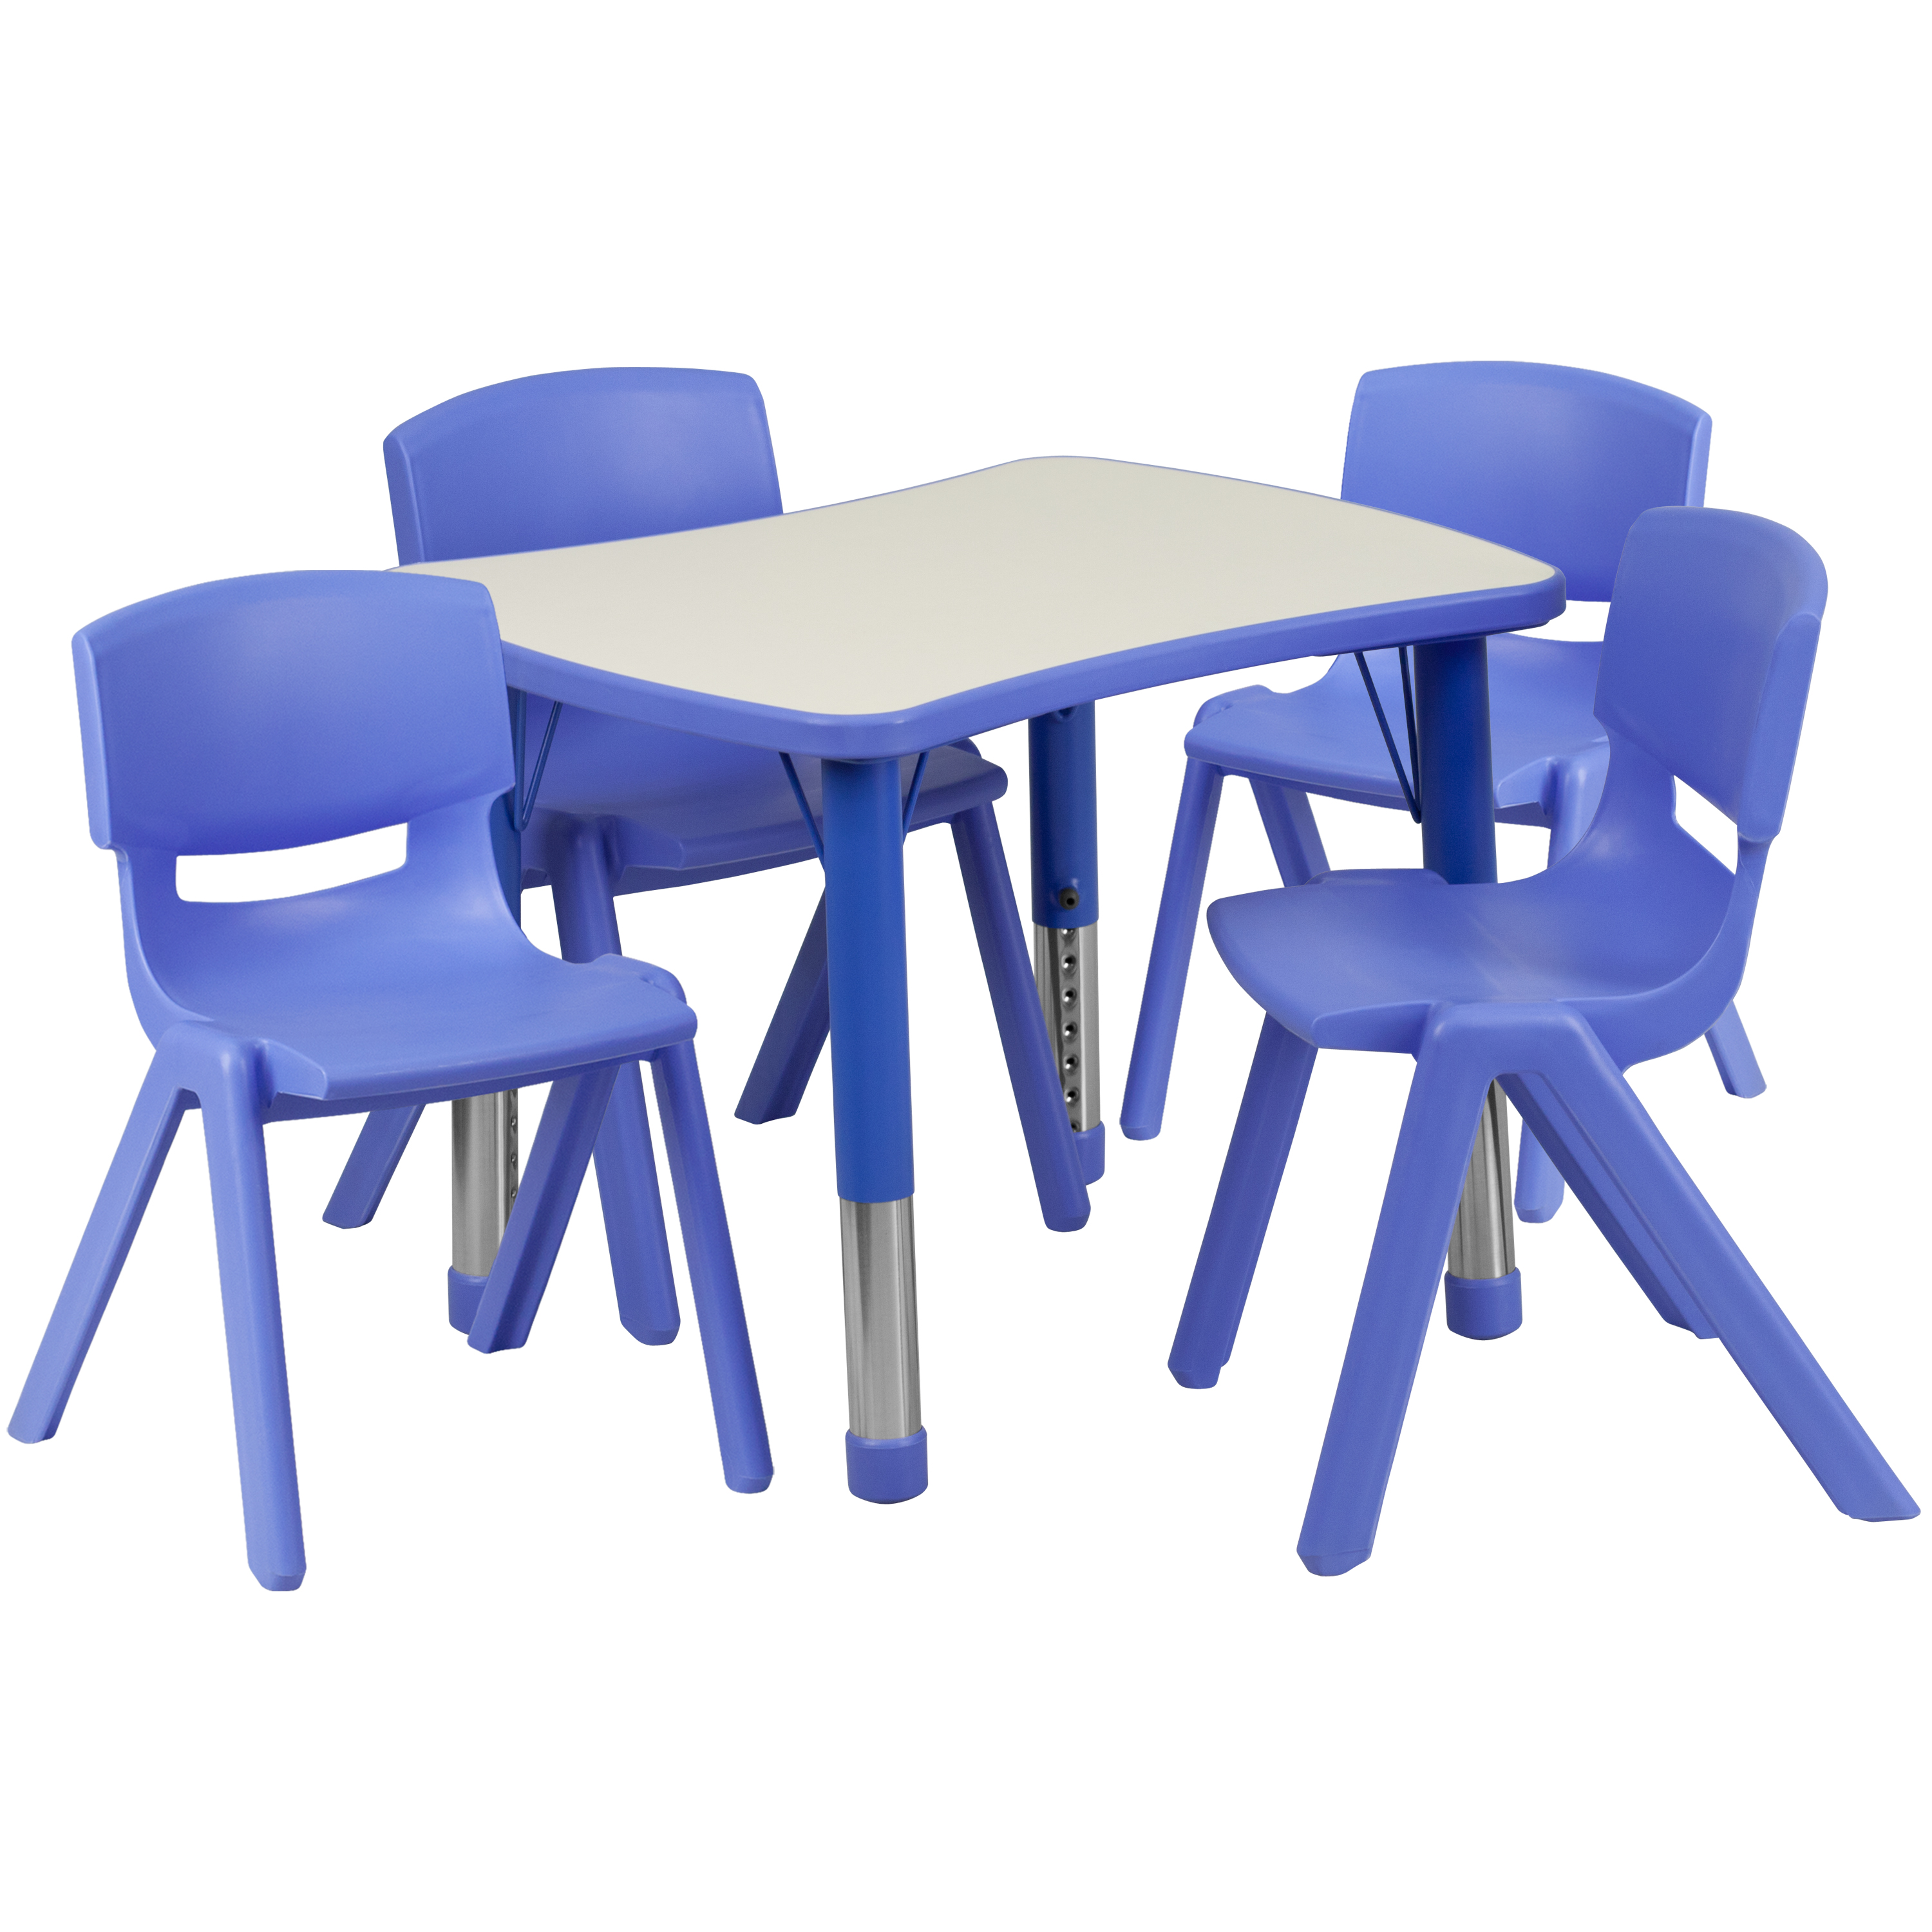 Flash Furniture YU-YCY-098-0034-RECT-TBL-BLUE-GG 21.875''W x 26.625''L Rectangular Blue Plastic Height Adjustable Activity Table with 4 Chairs